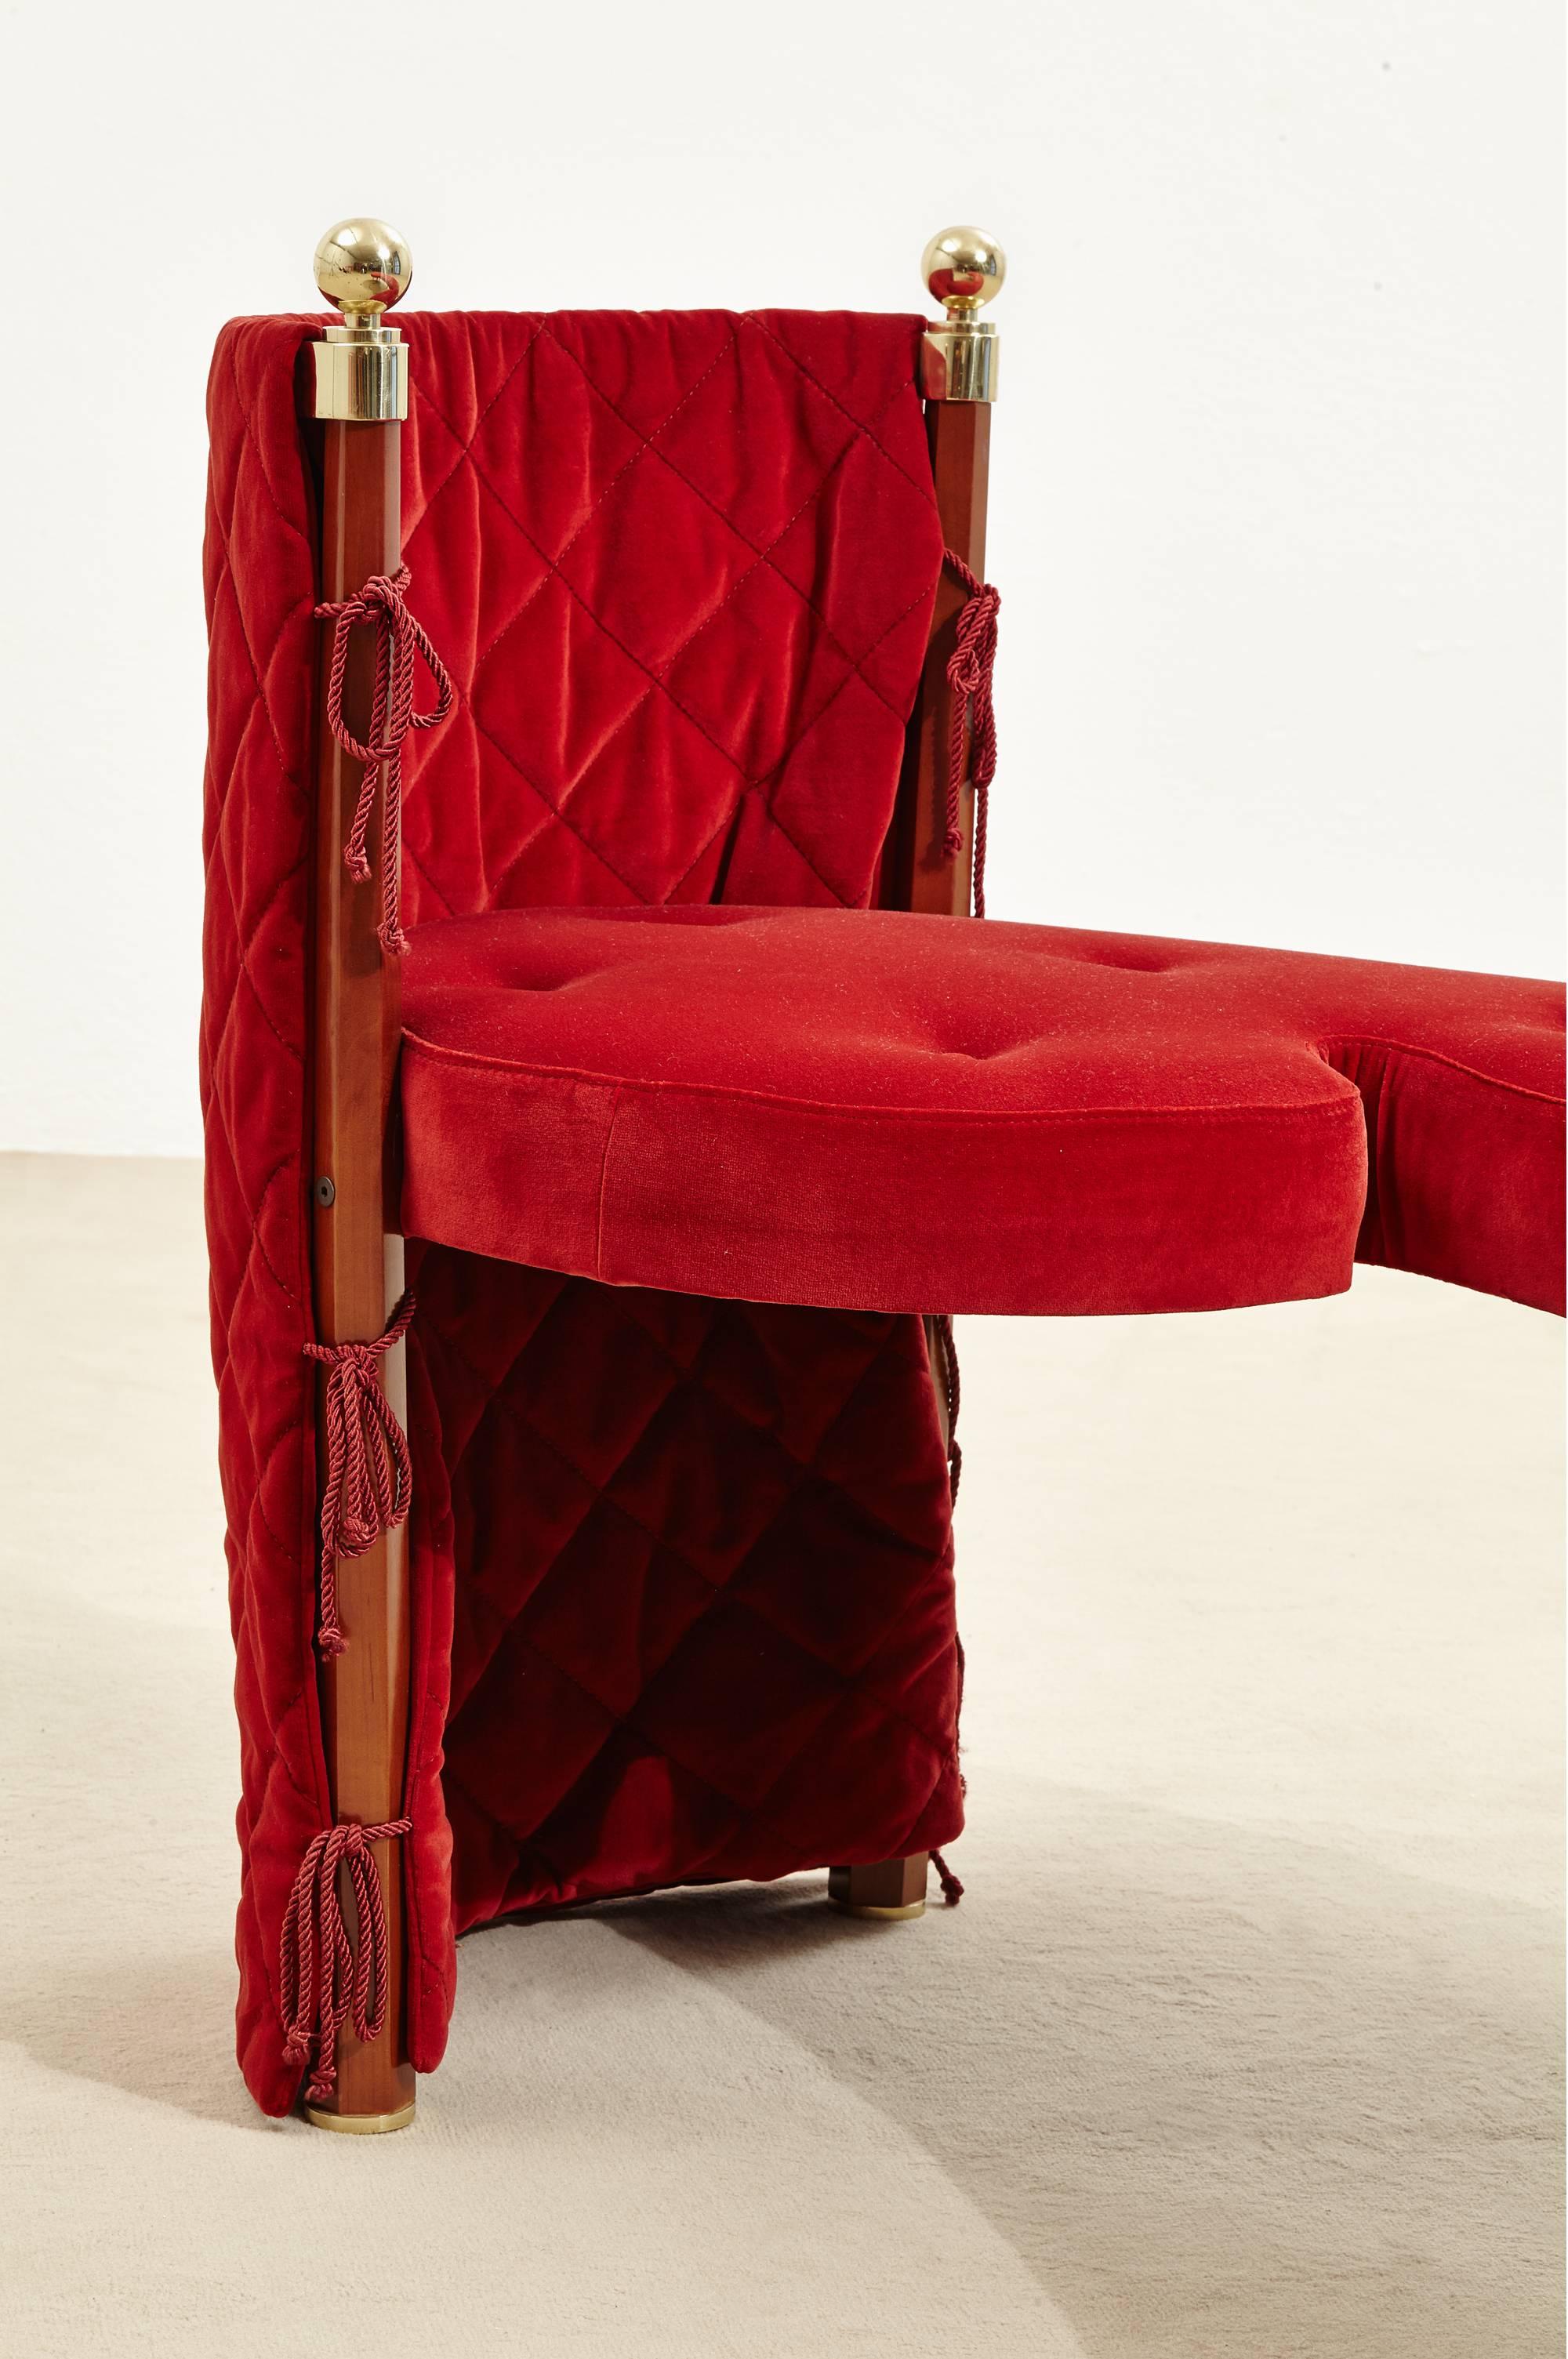 Three-Seat Red Velvet Bench by Jeannot Cerutti for Sawaya & Moroni, 1991 In Excellent Condition For Sale In Ravenna, IT